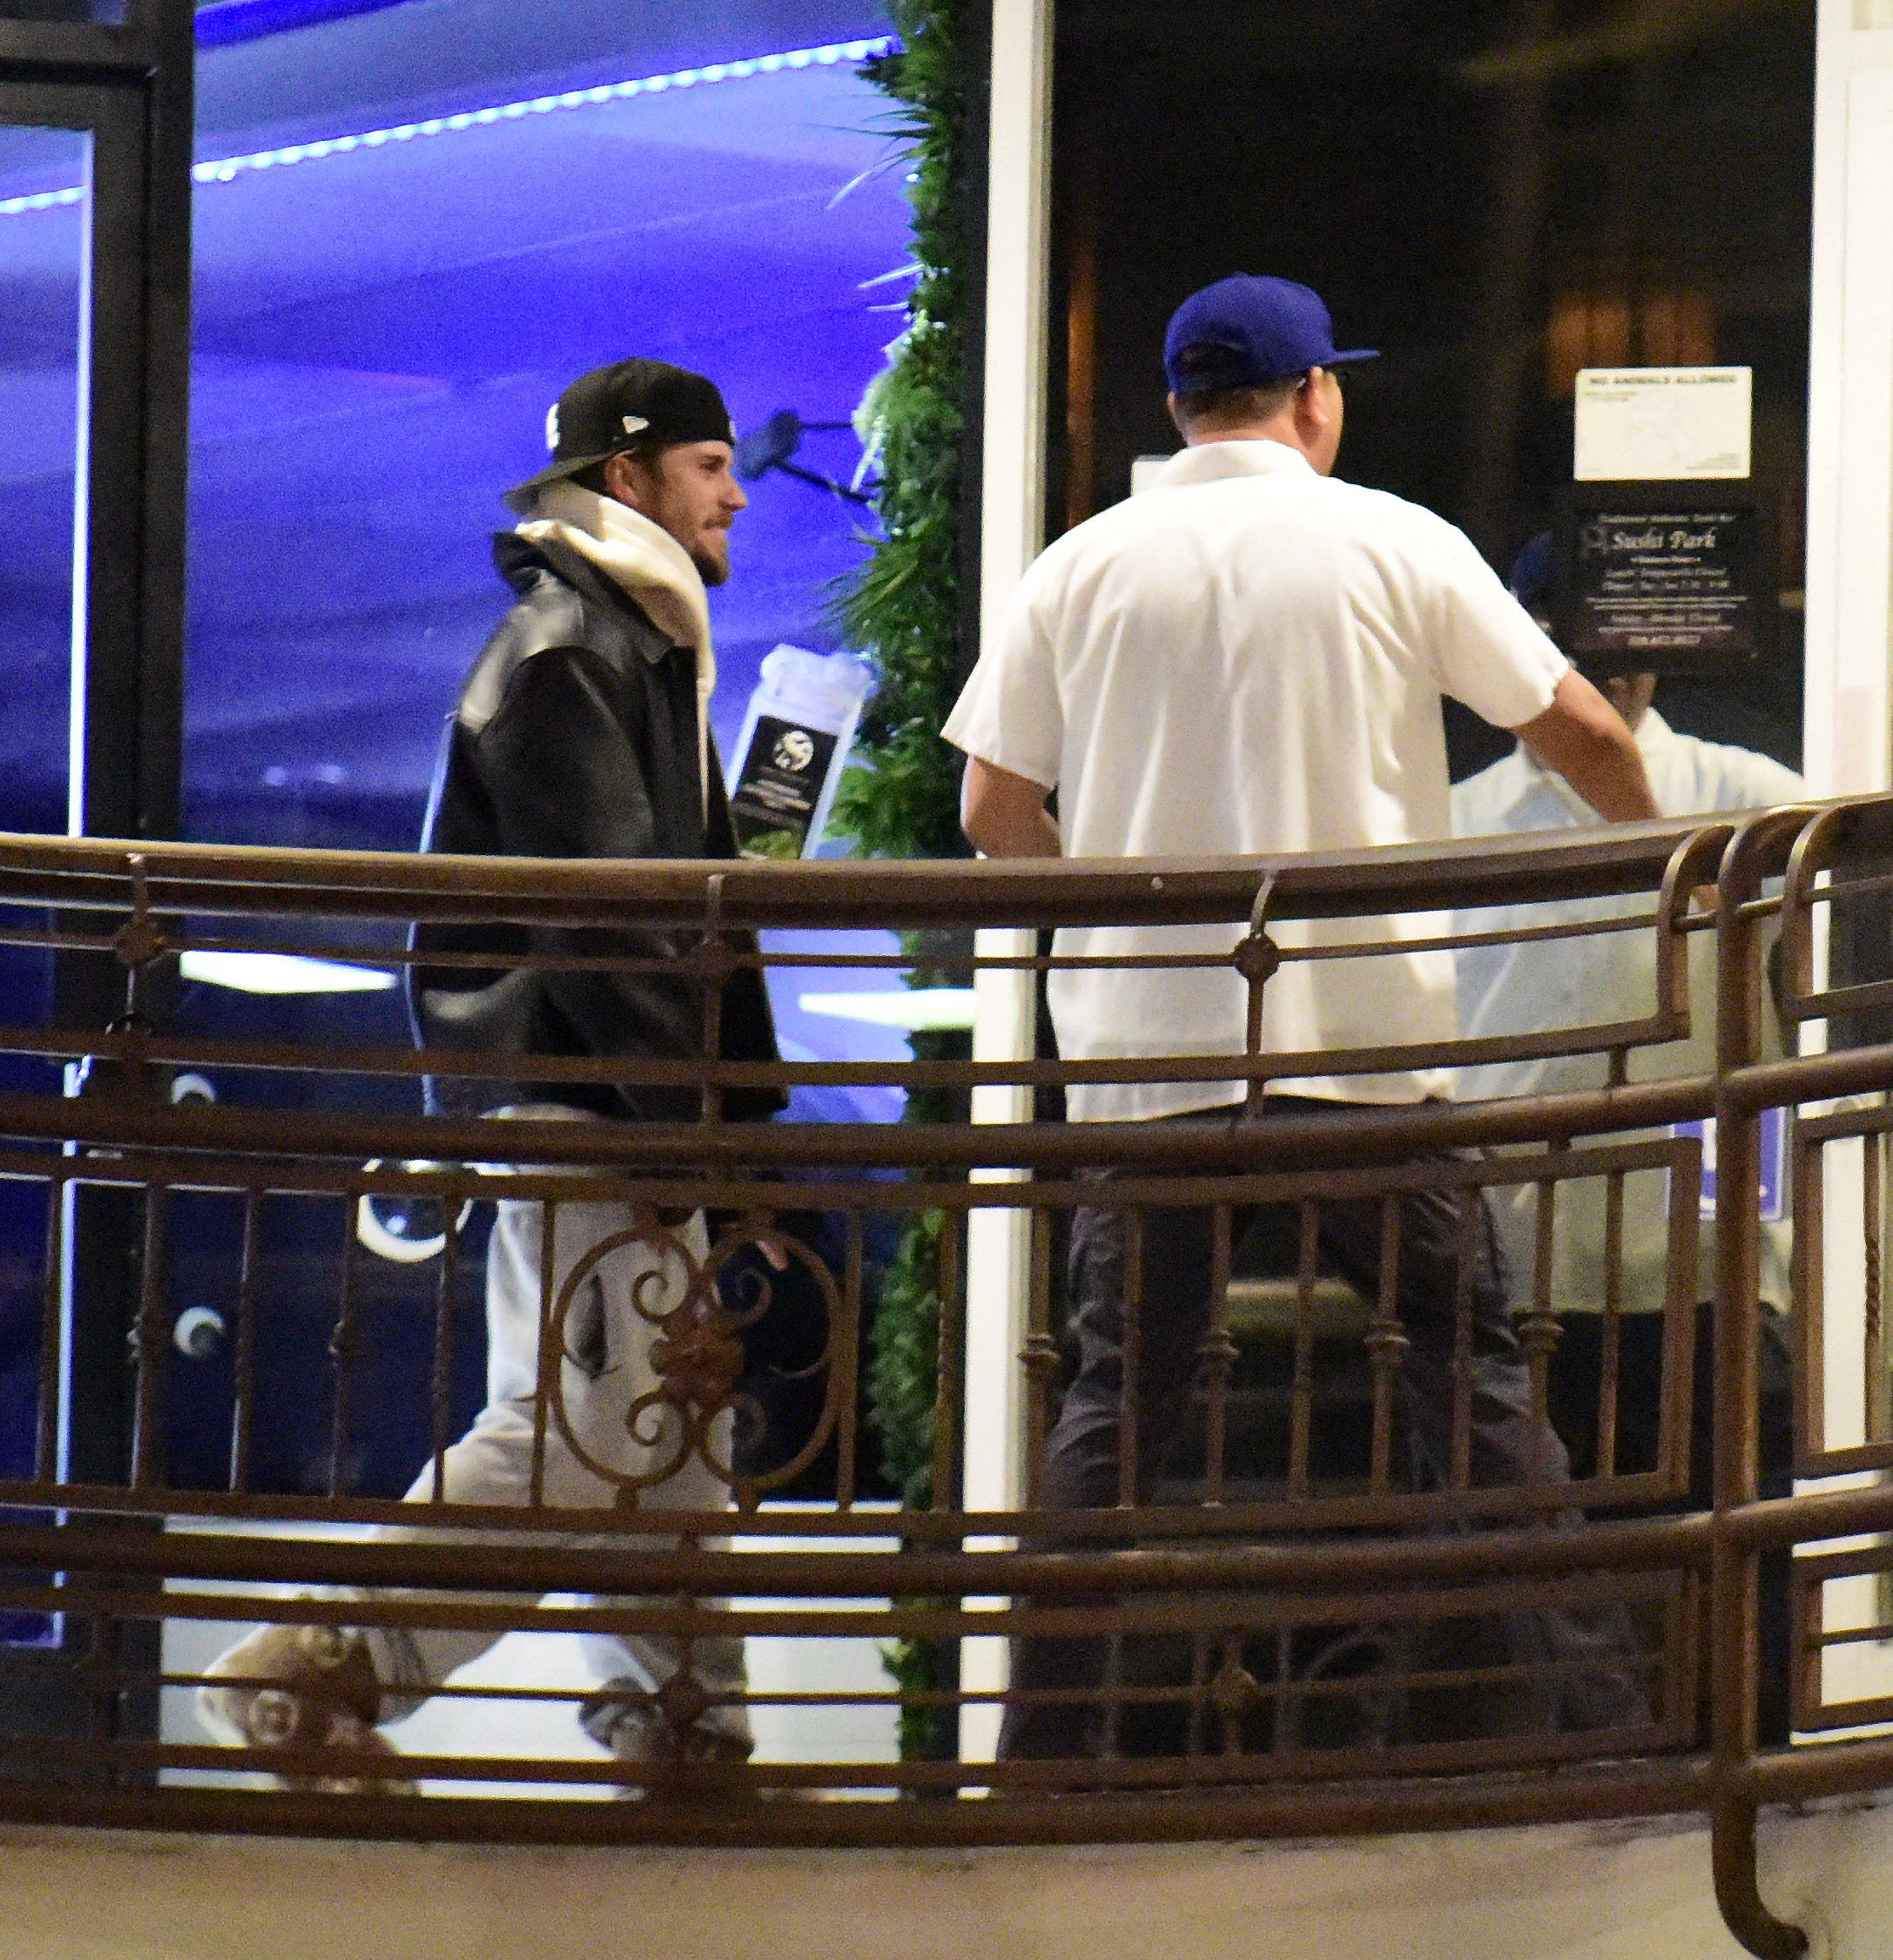 Fans expressed their concerns for Justin as he's looked solemn in photos